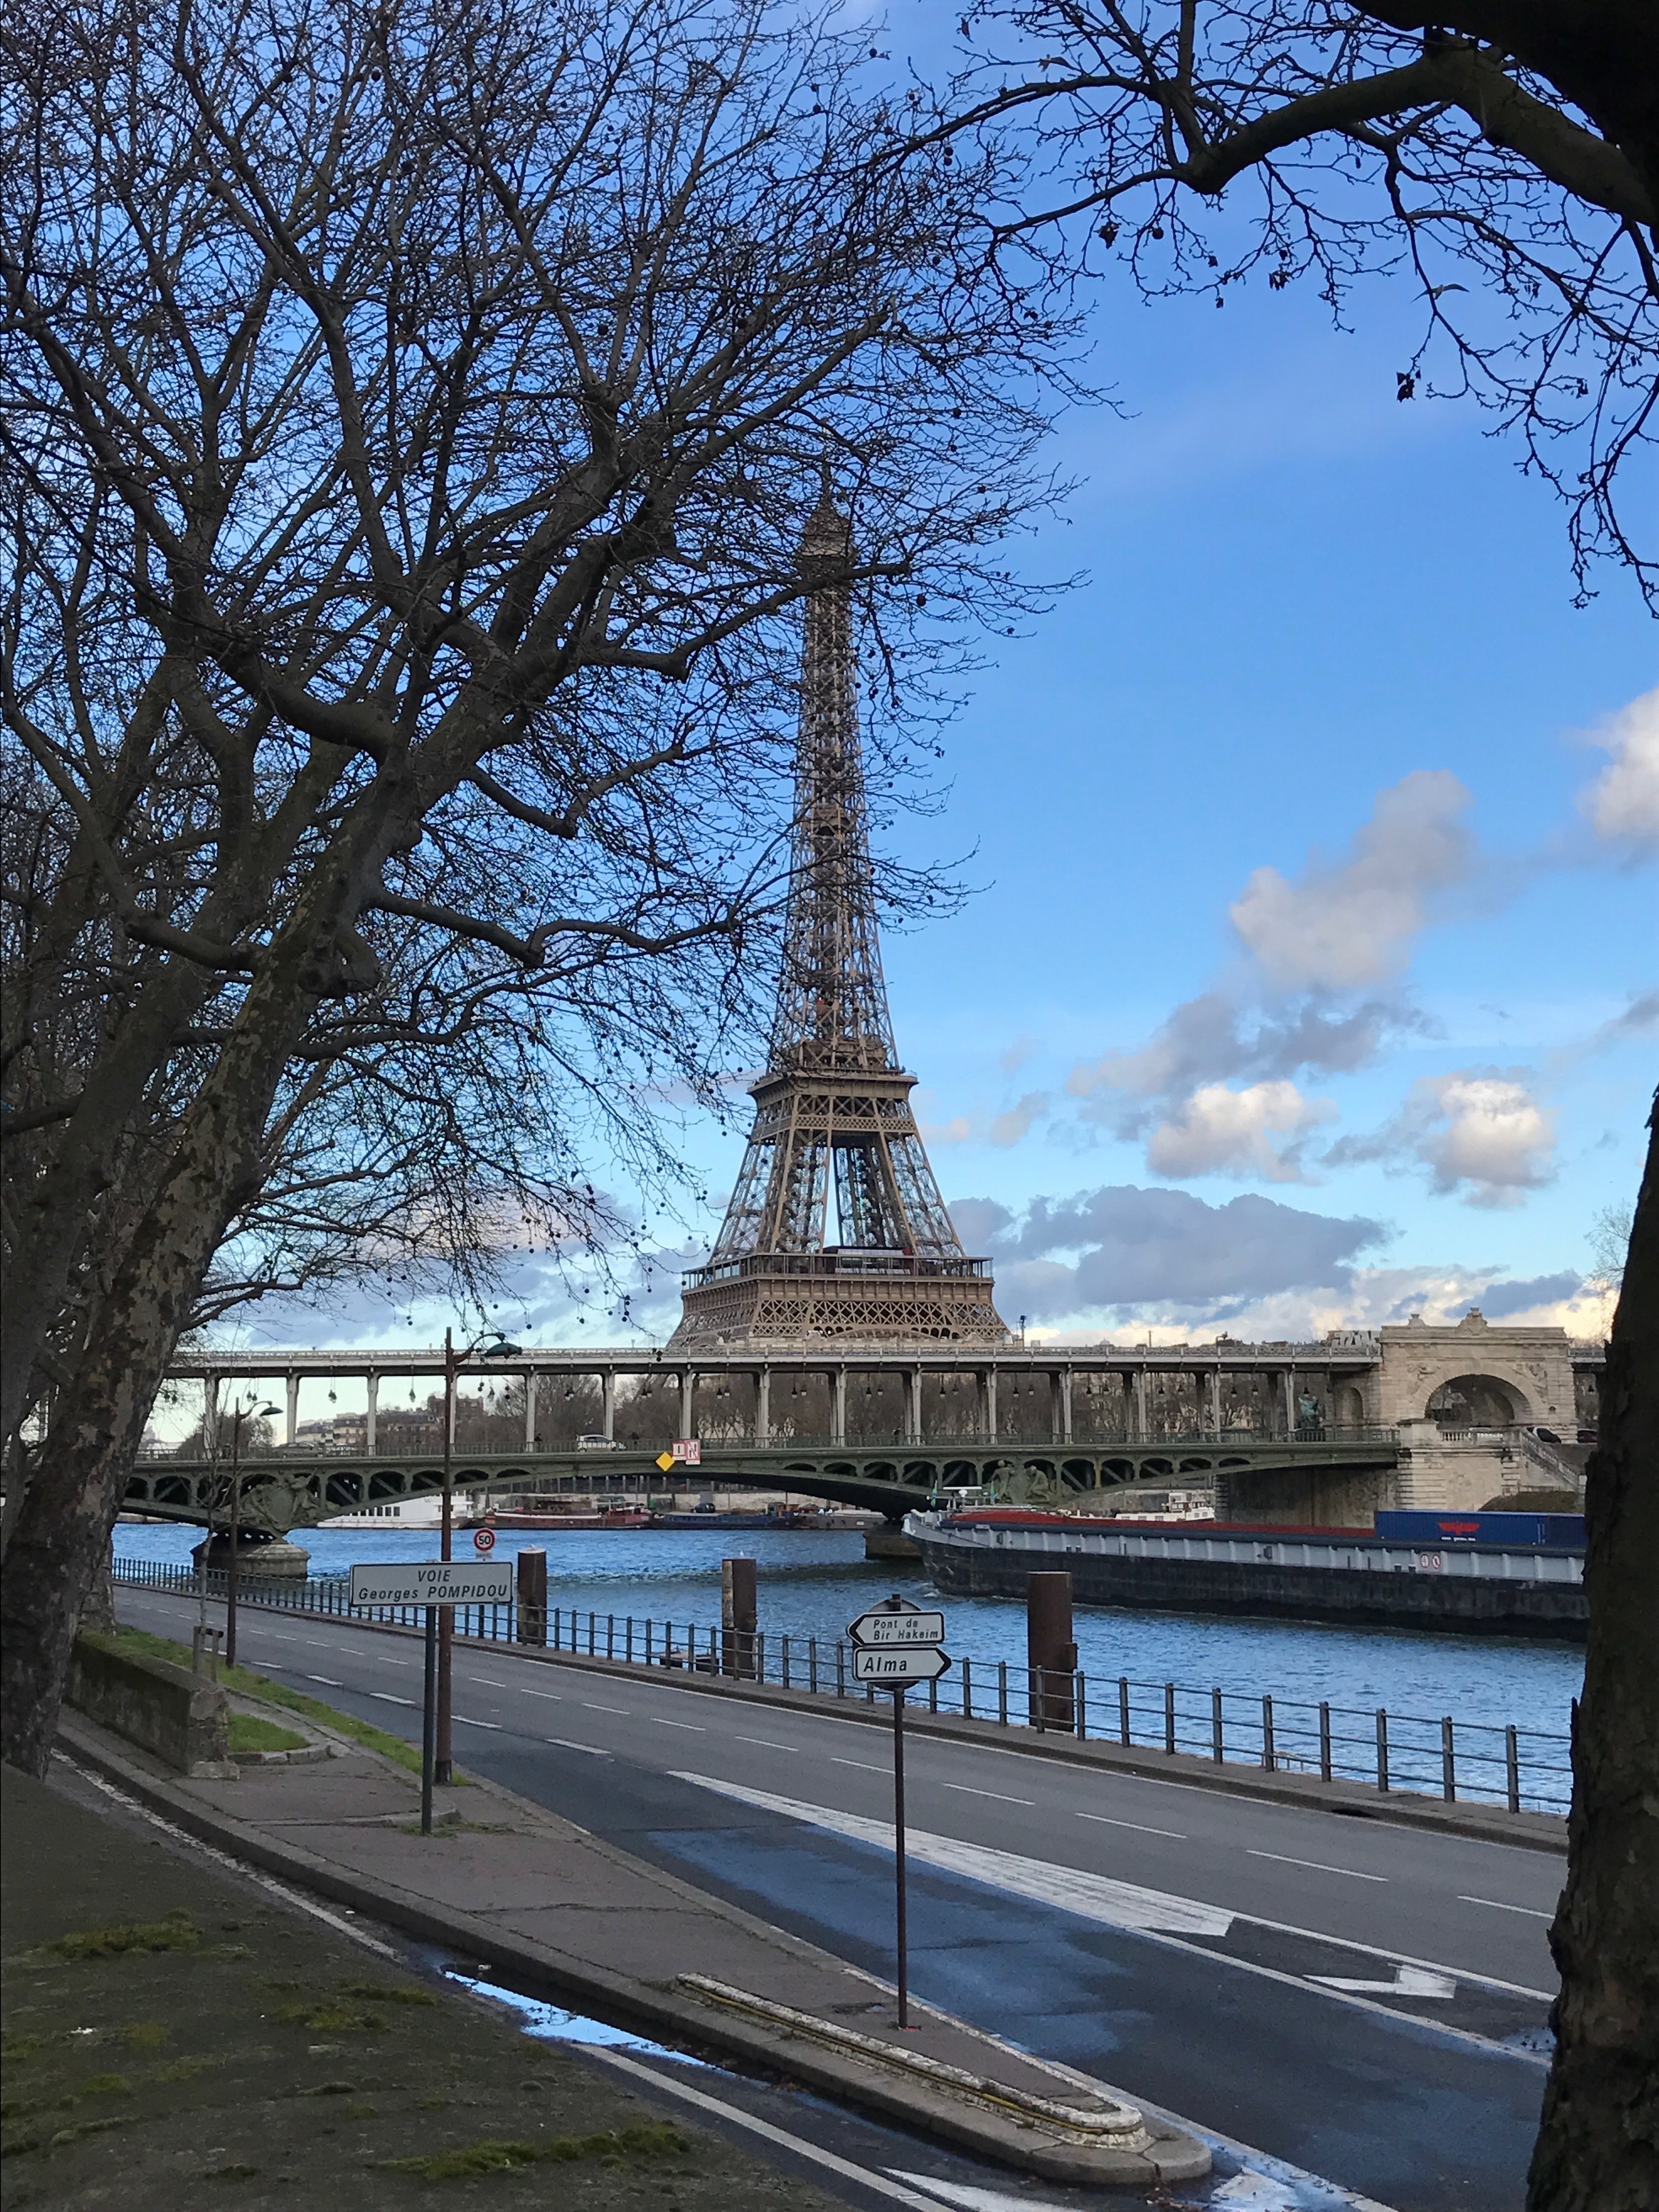 A view of the Eiffel Tower from across the Seine